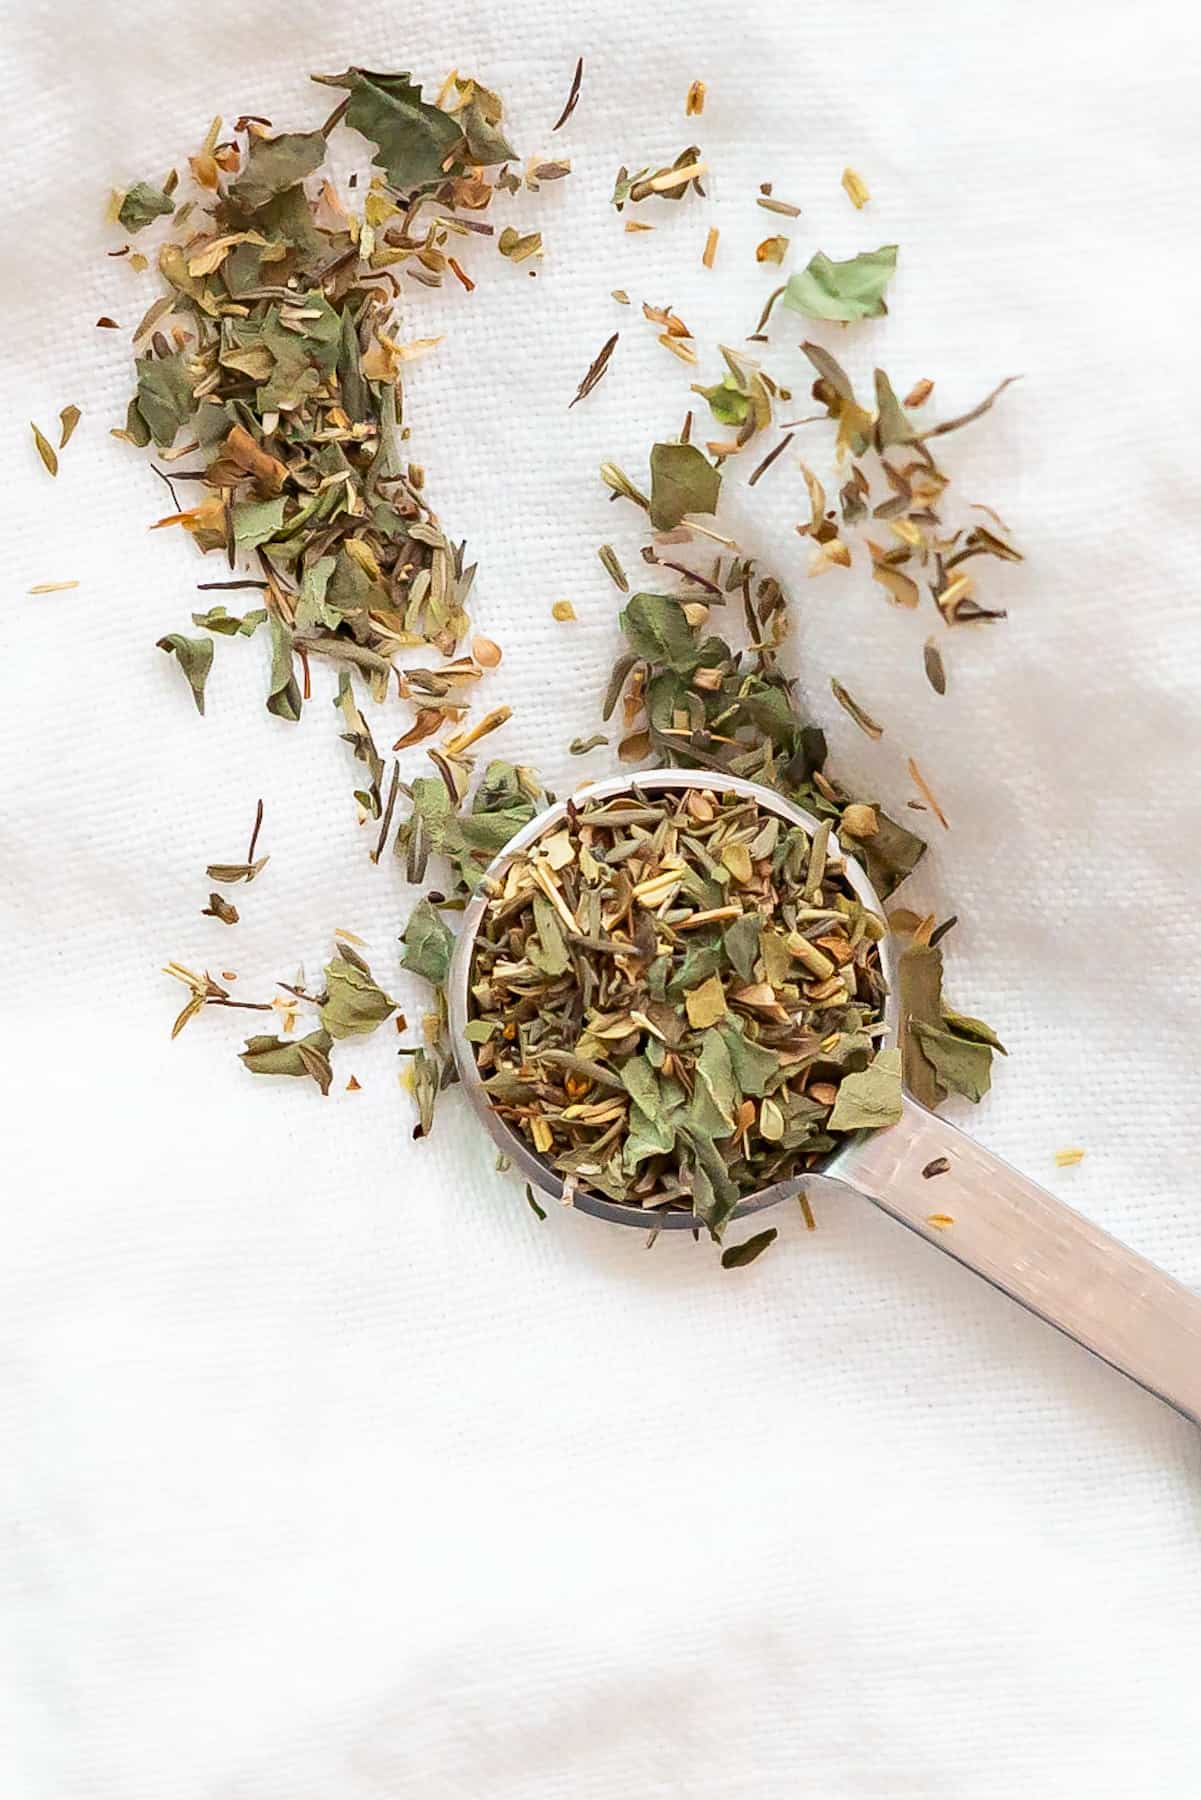 A teaspoon with an Italian seasoning substitute made of basil, oregano, rosemary, and thyme.